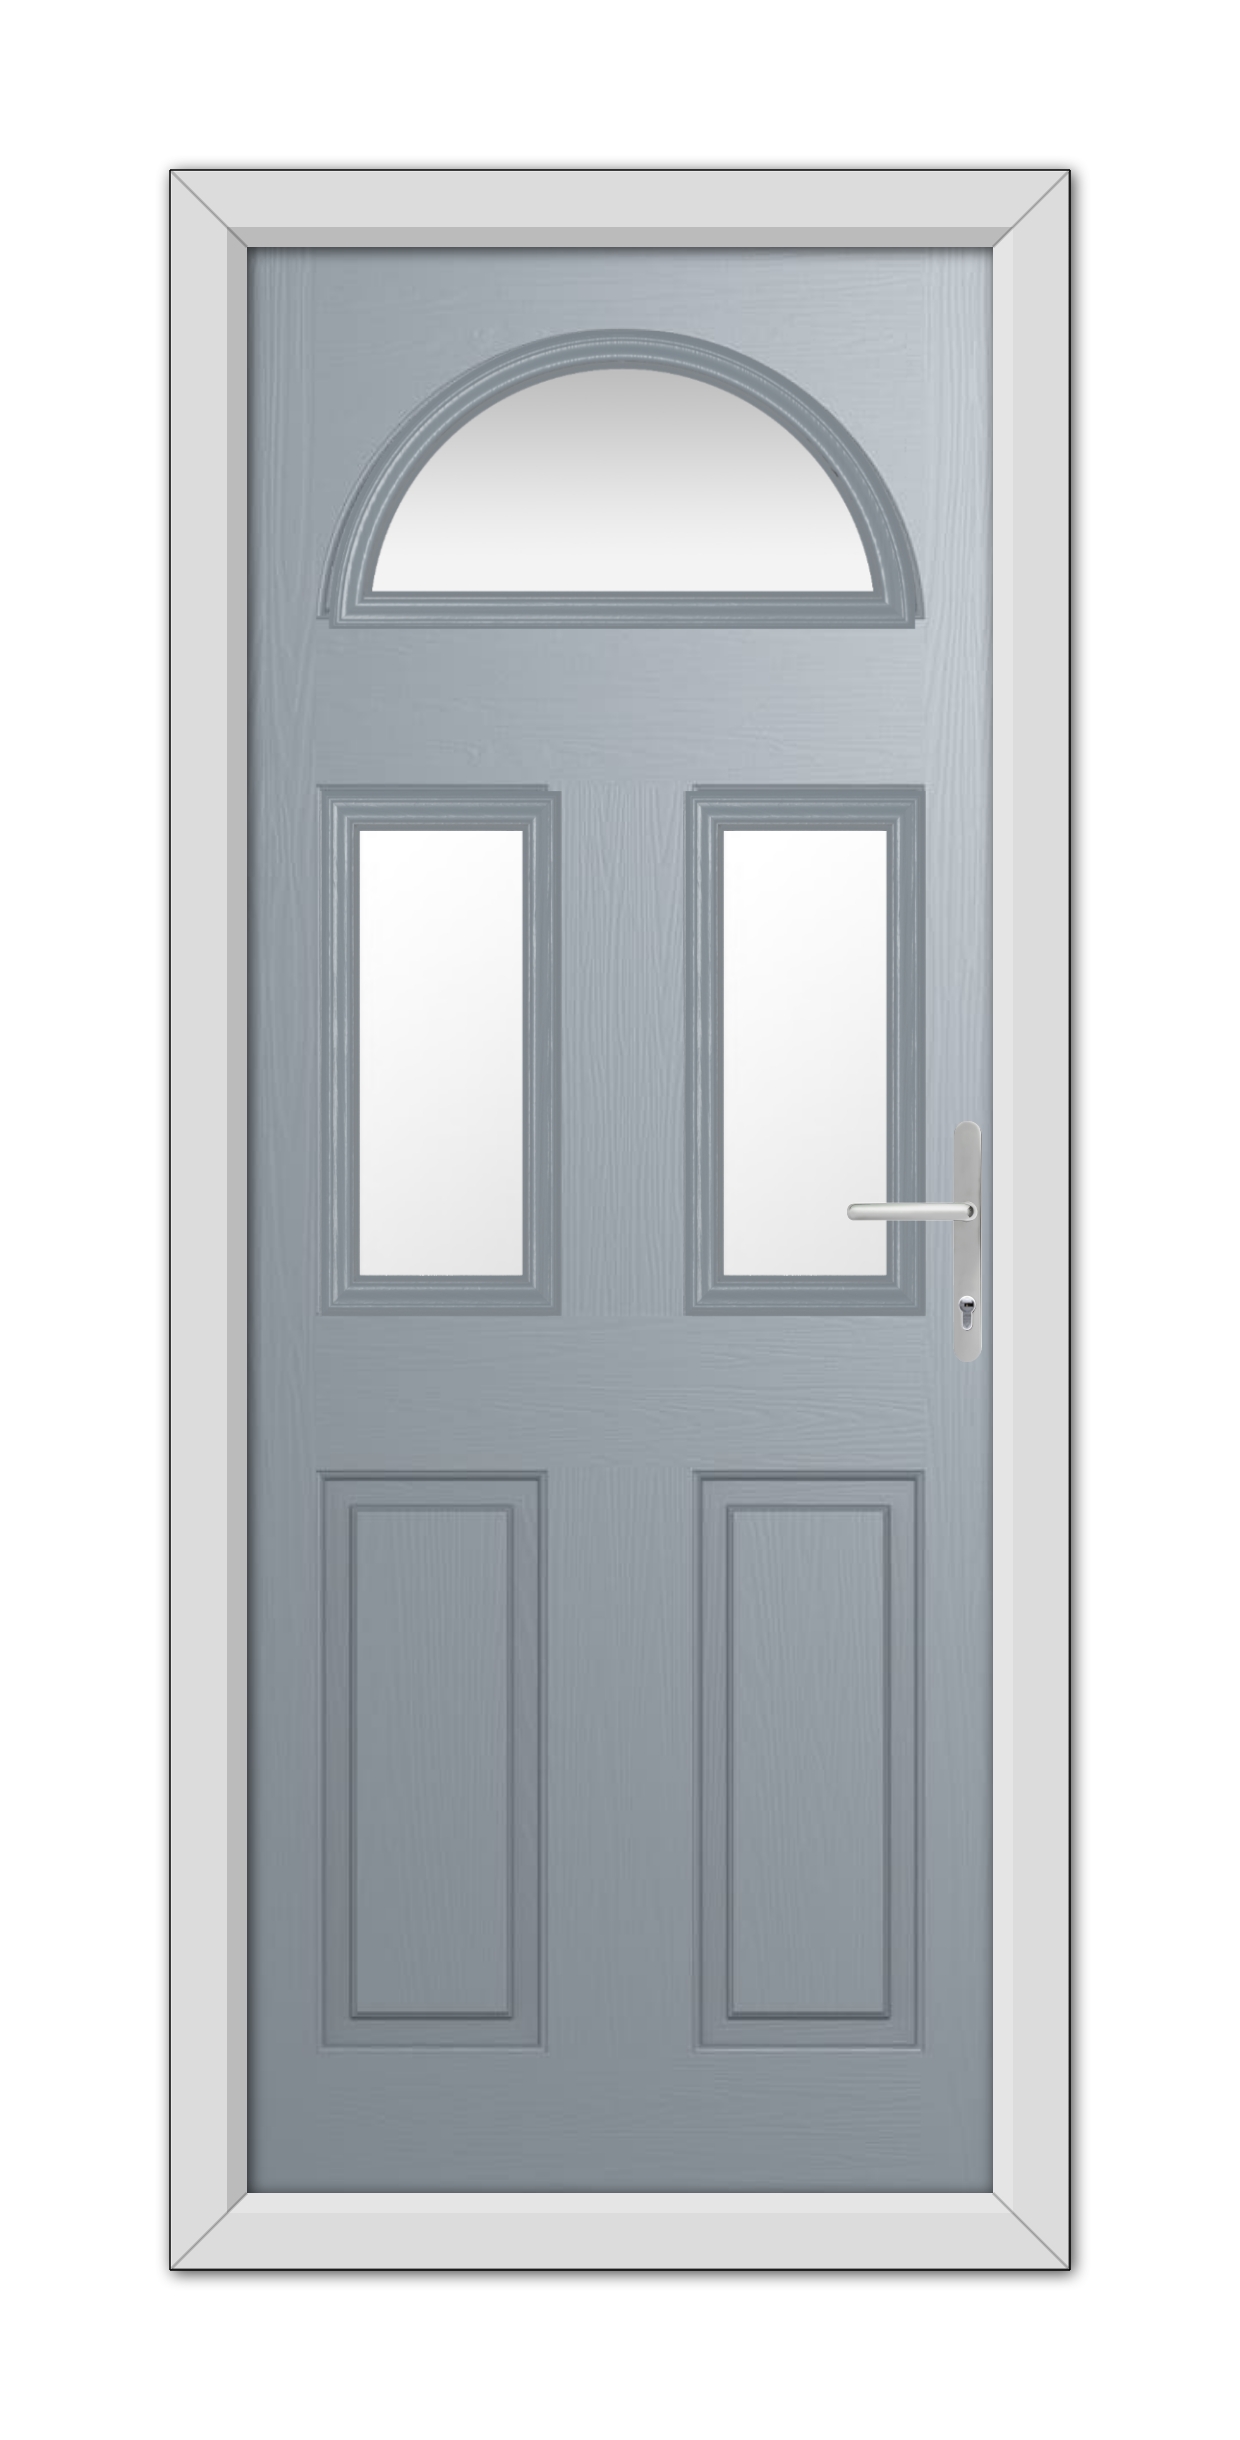 A French Grey Winslow 3 Composite Door 48mm Timber Core featuring an arched transom window at the top and two rectangular panel windows, equipped with a silver handle.